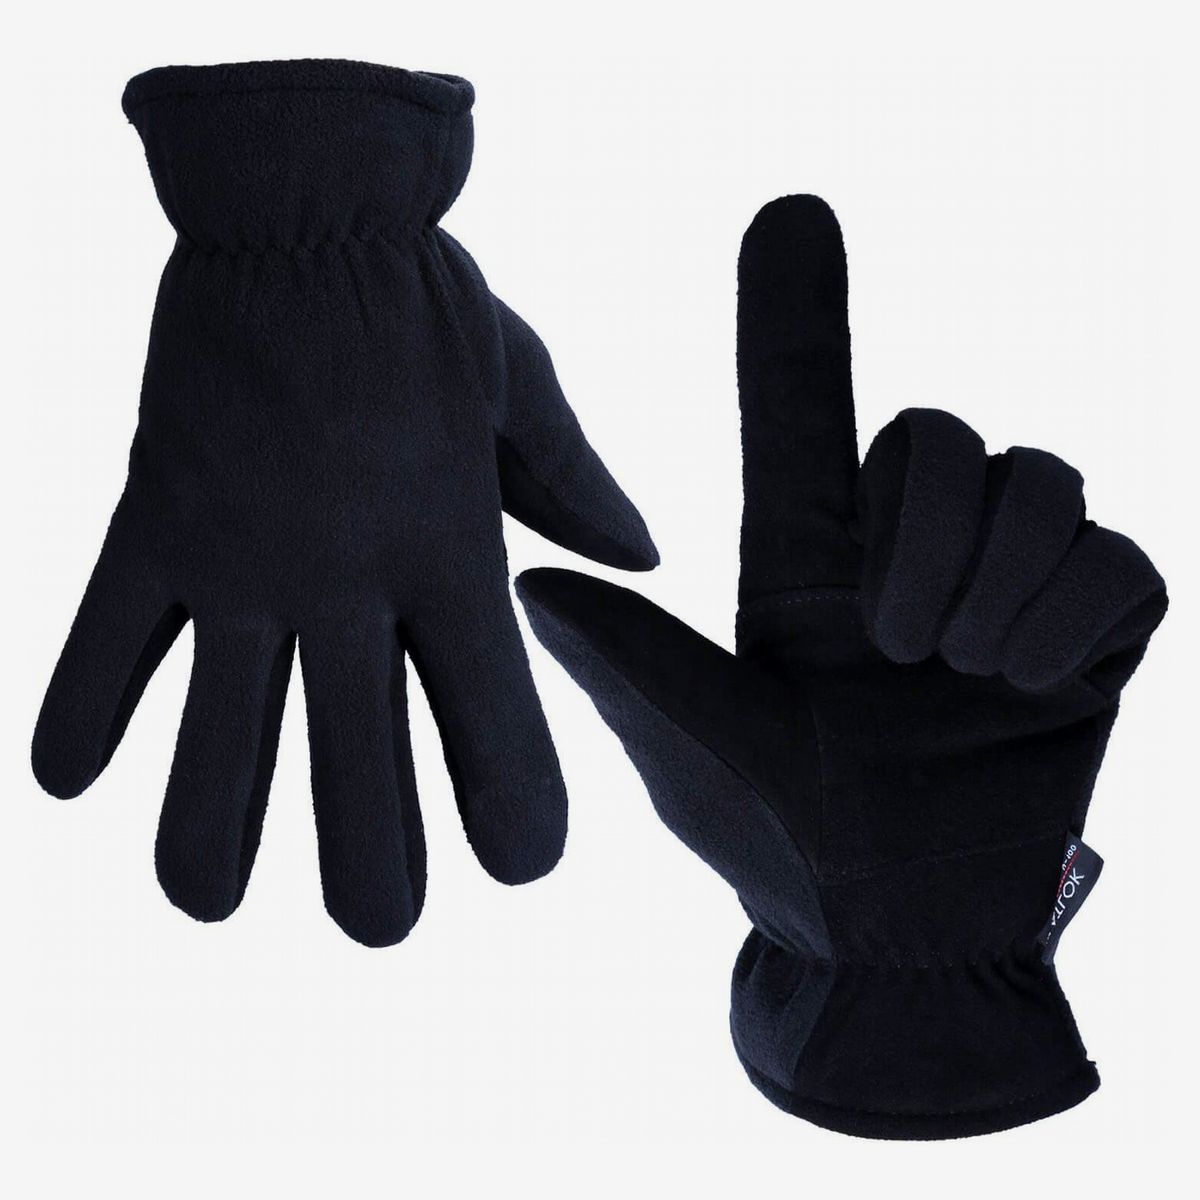 OZERO Winter Gloves Thermal in Cold Weather Touch Screen Glove with Deerskin Palm and Warm Polar Fleece for Men and Women 